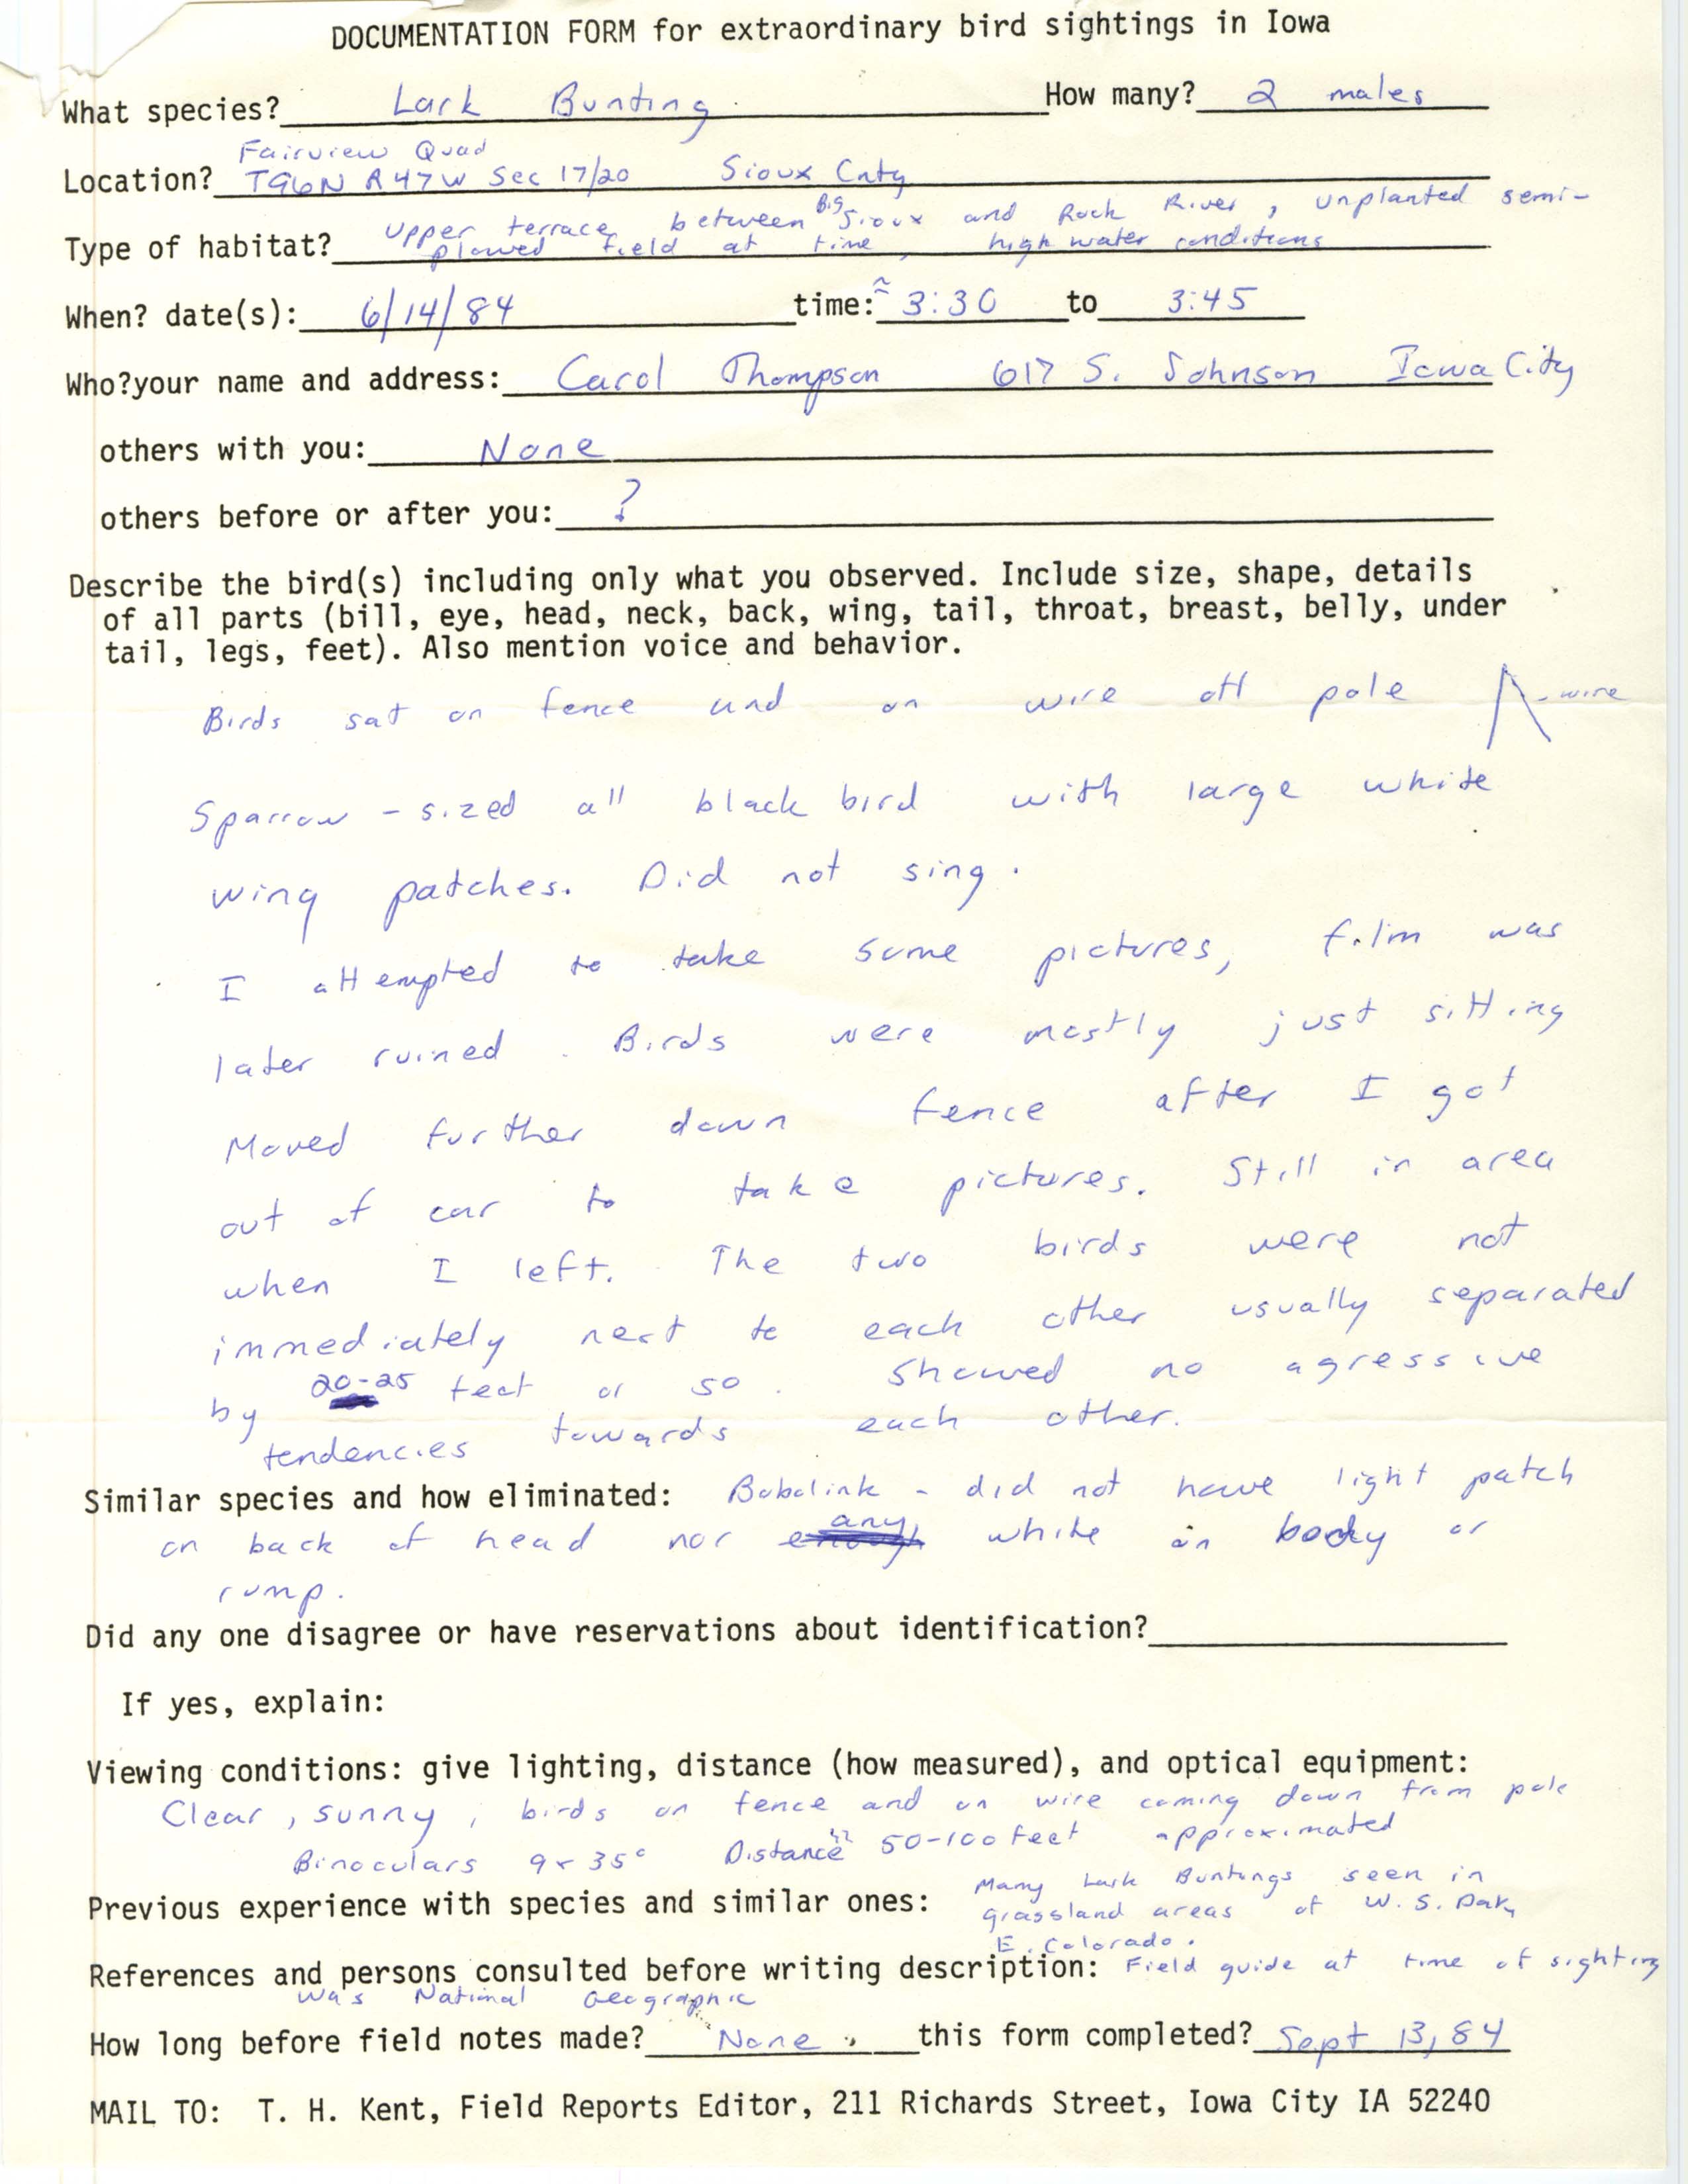 Rare bird documentation form for Lark Bunting in Garfield Township in Sioux County, 1984